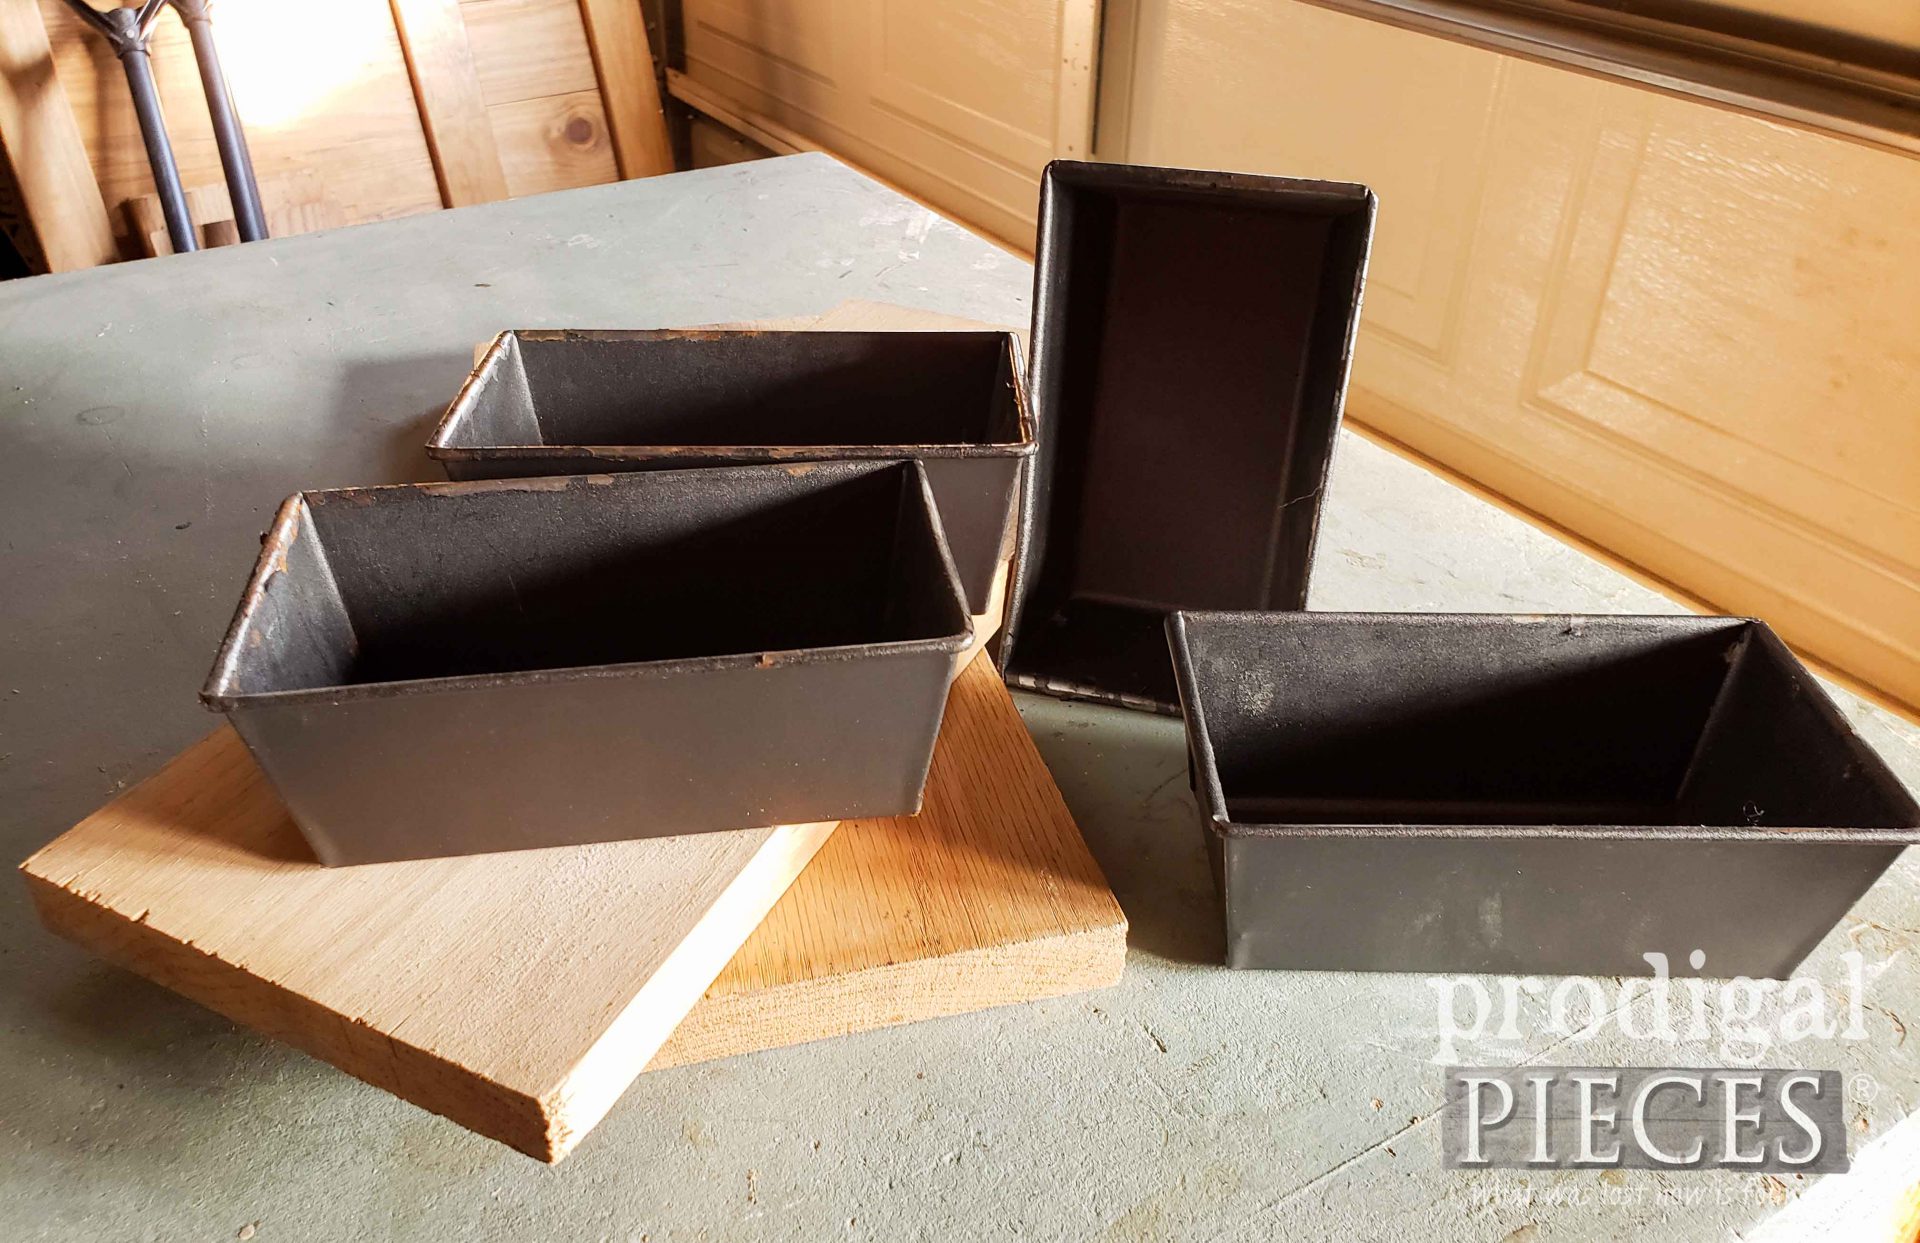 Old Bread Pans Before Upcycle | prodigalpieces.com